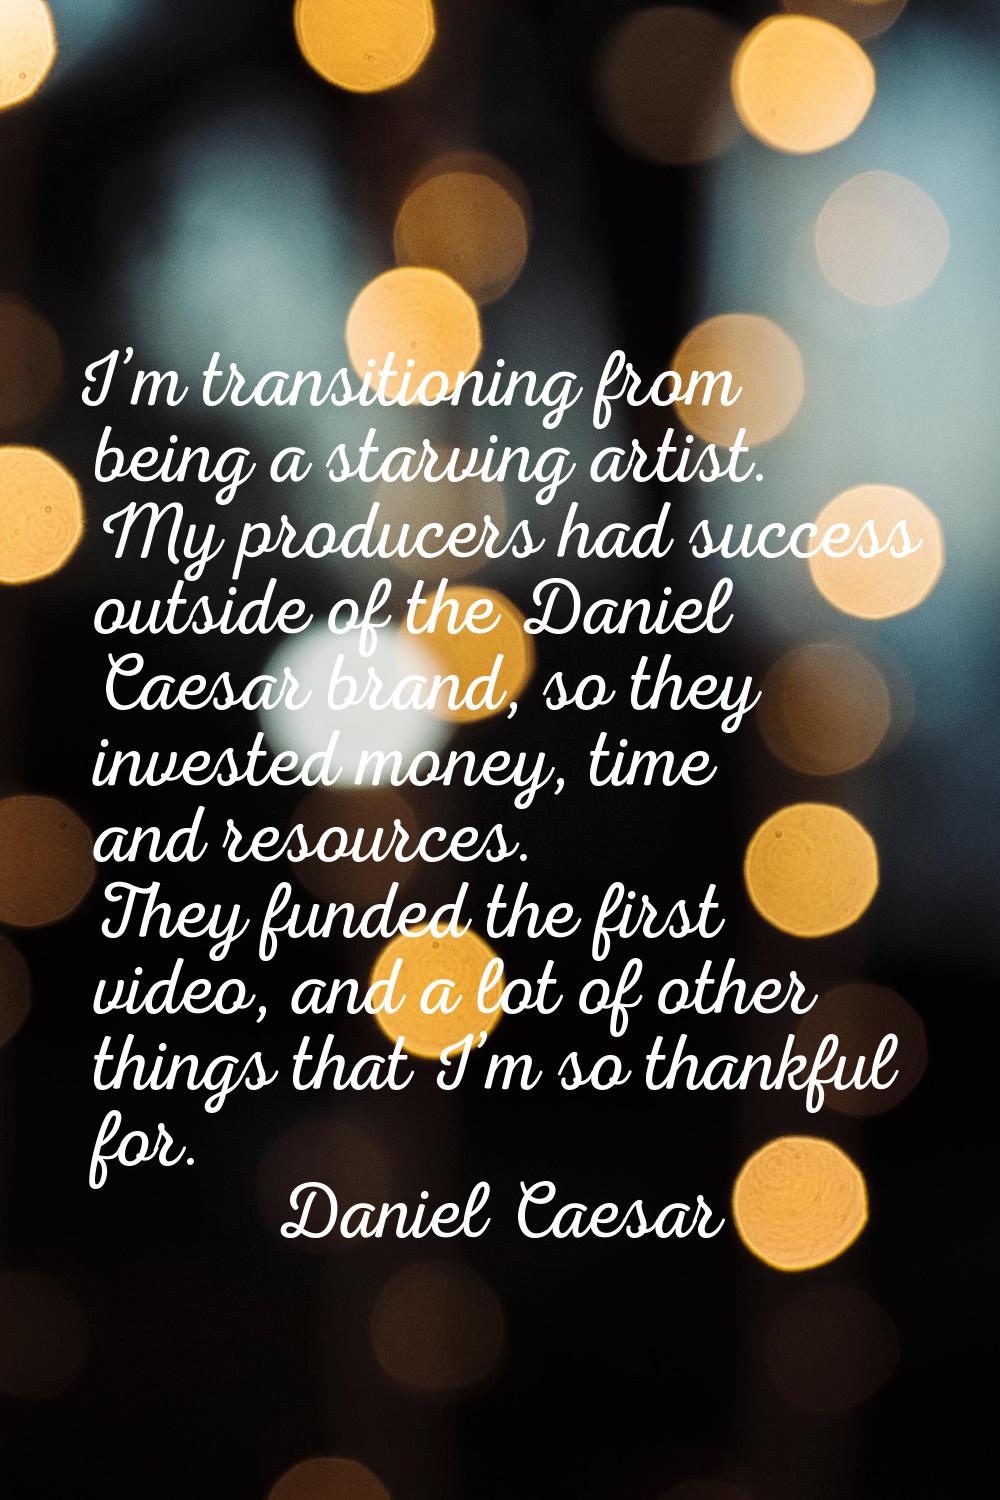 I’m transitioning from being a starving artist. My producers had success outside of the Daniel Caes